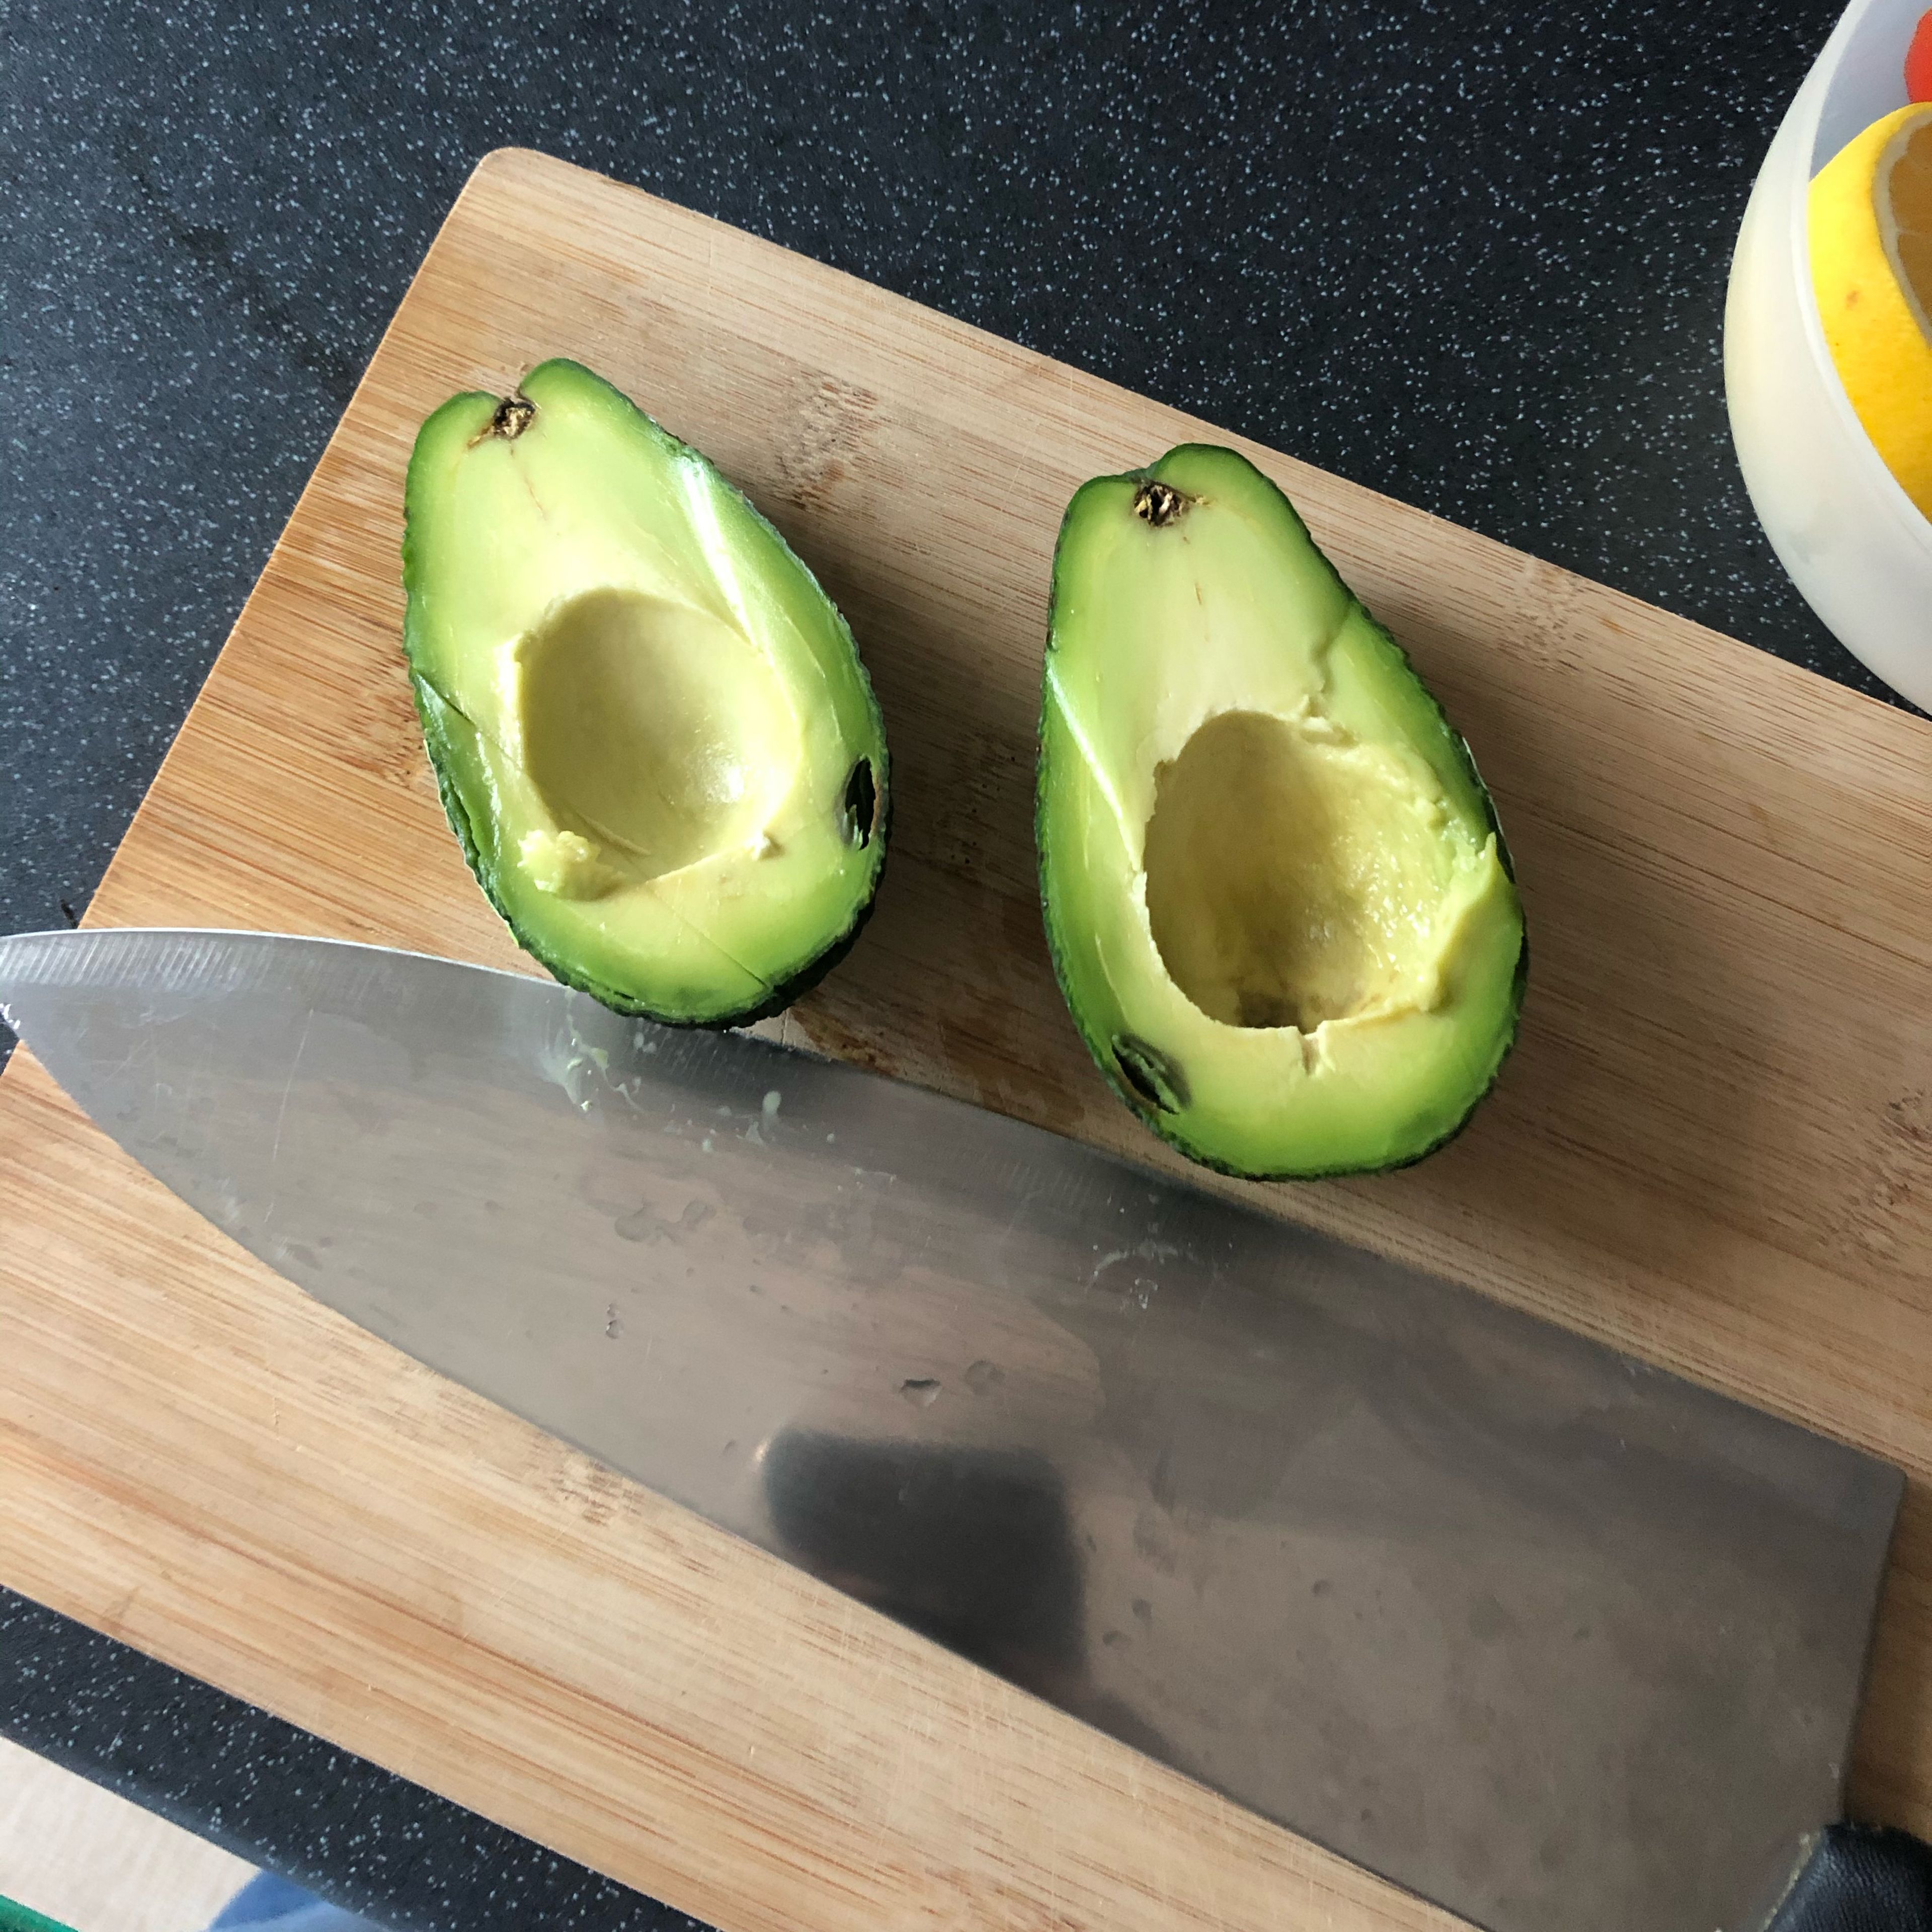 In a meanwhile, cut the avocado in half and scoop out. Place in blender.